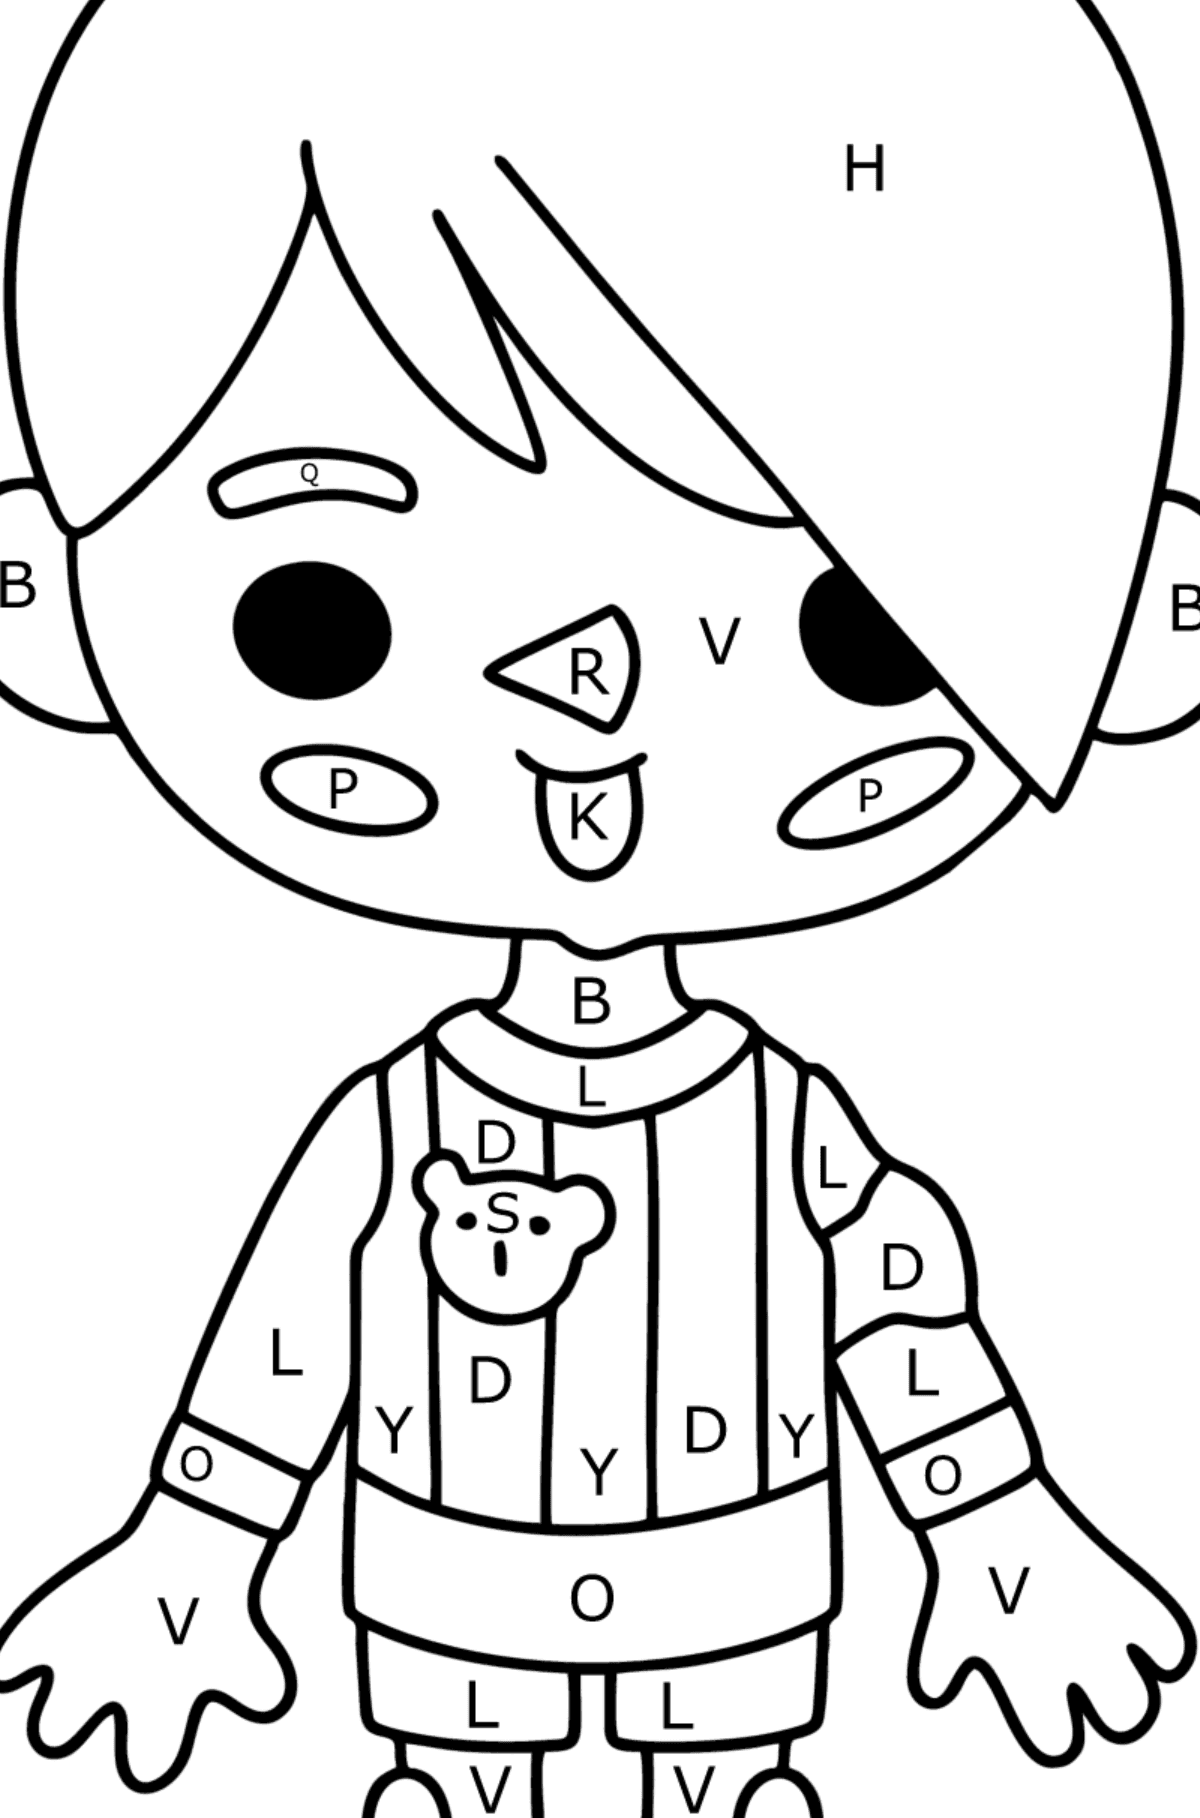 Coloring page Boy tocaboca 05 - Coloring by Letters for Kids